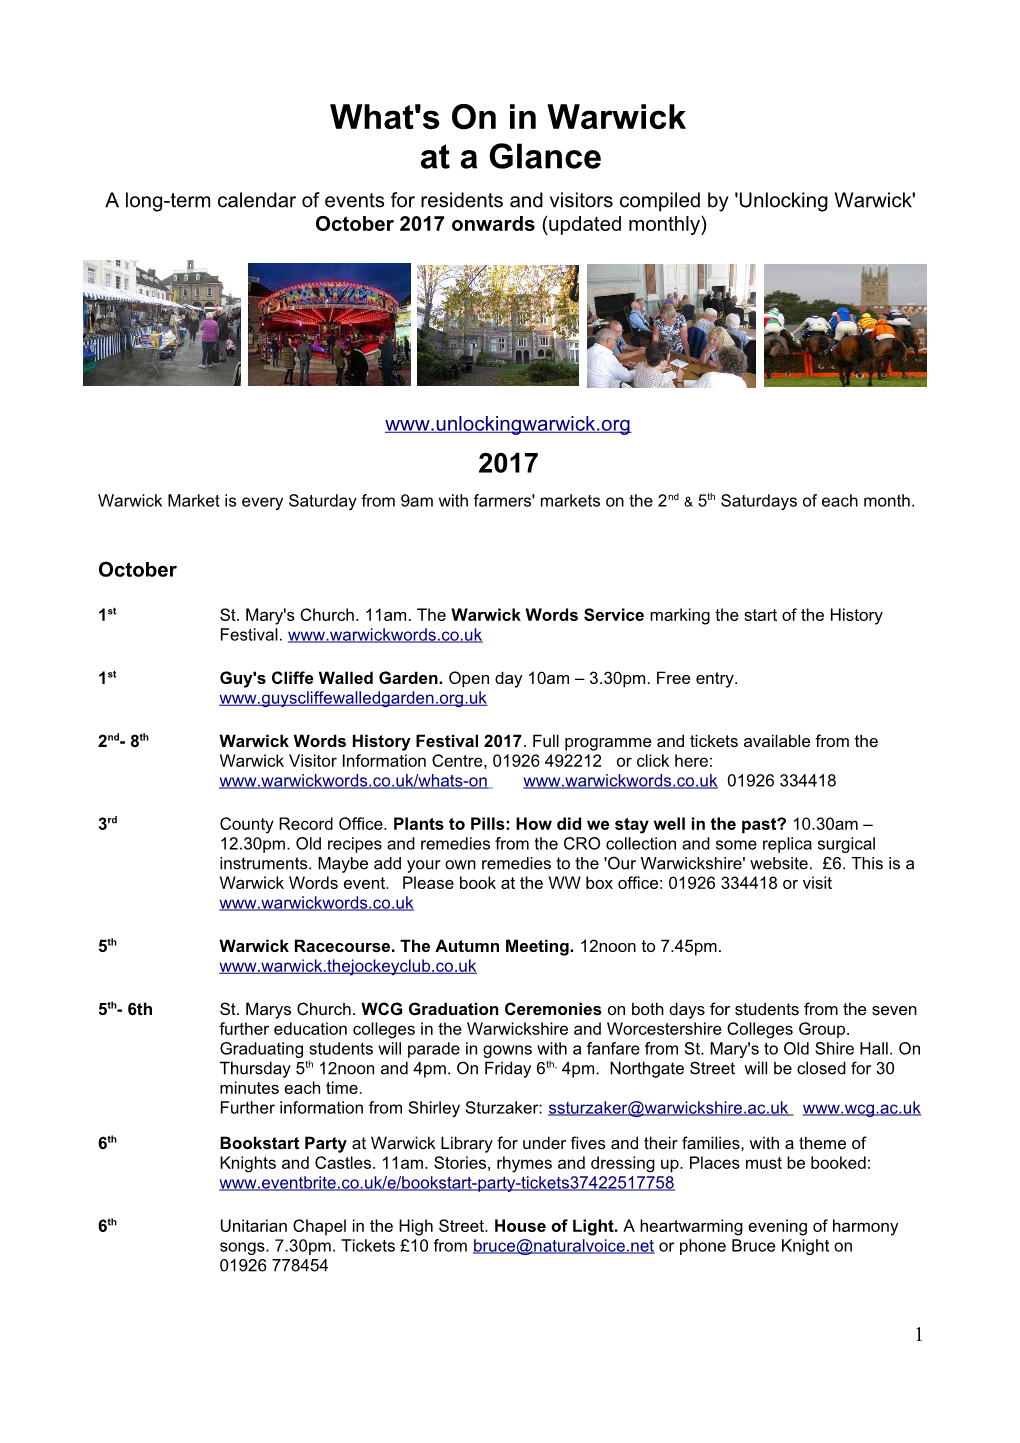 What's on in Warwick at a Glance a Long-Term Calendar of Events for Residents and Visitors Compiled by 'Unlocking Warwick' October 2017 Onwards (Updated Monthly)